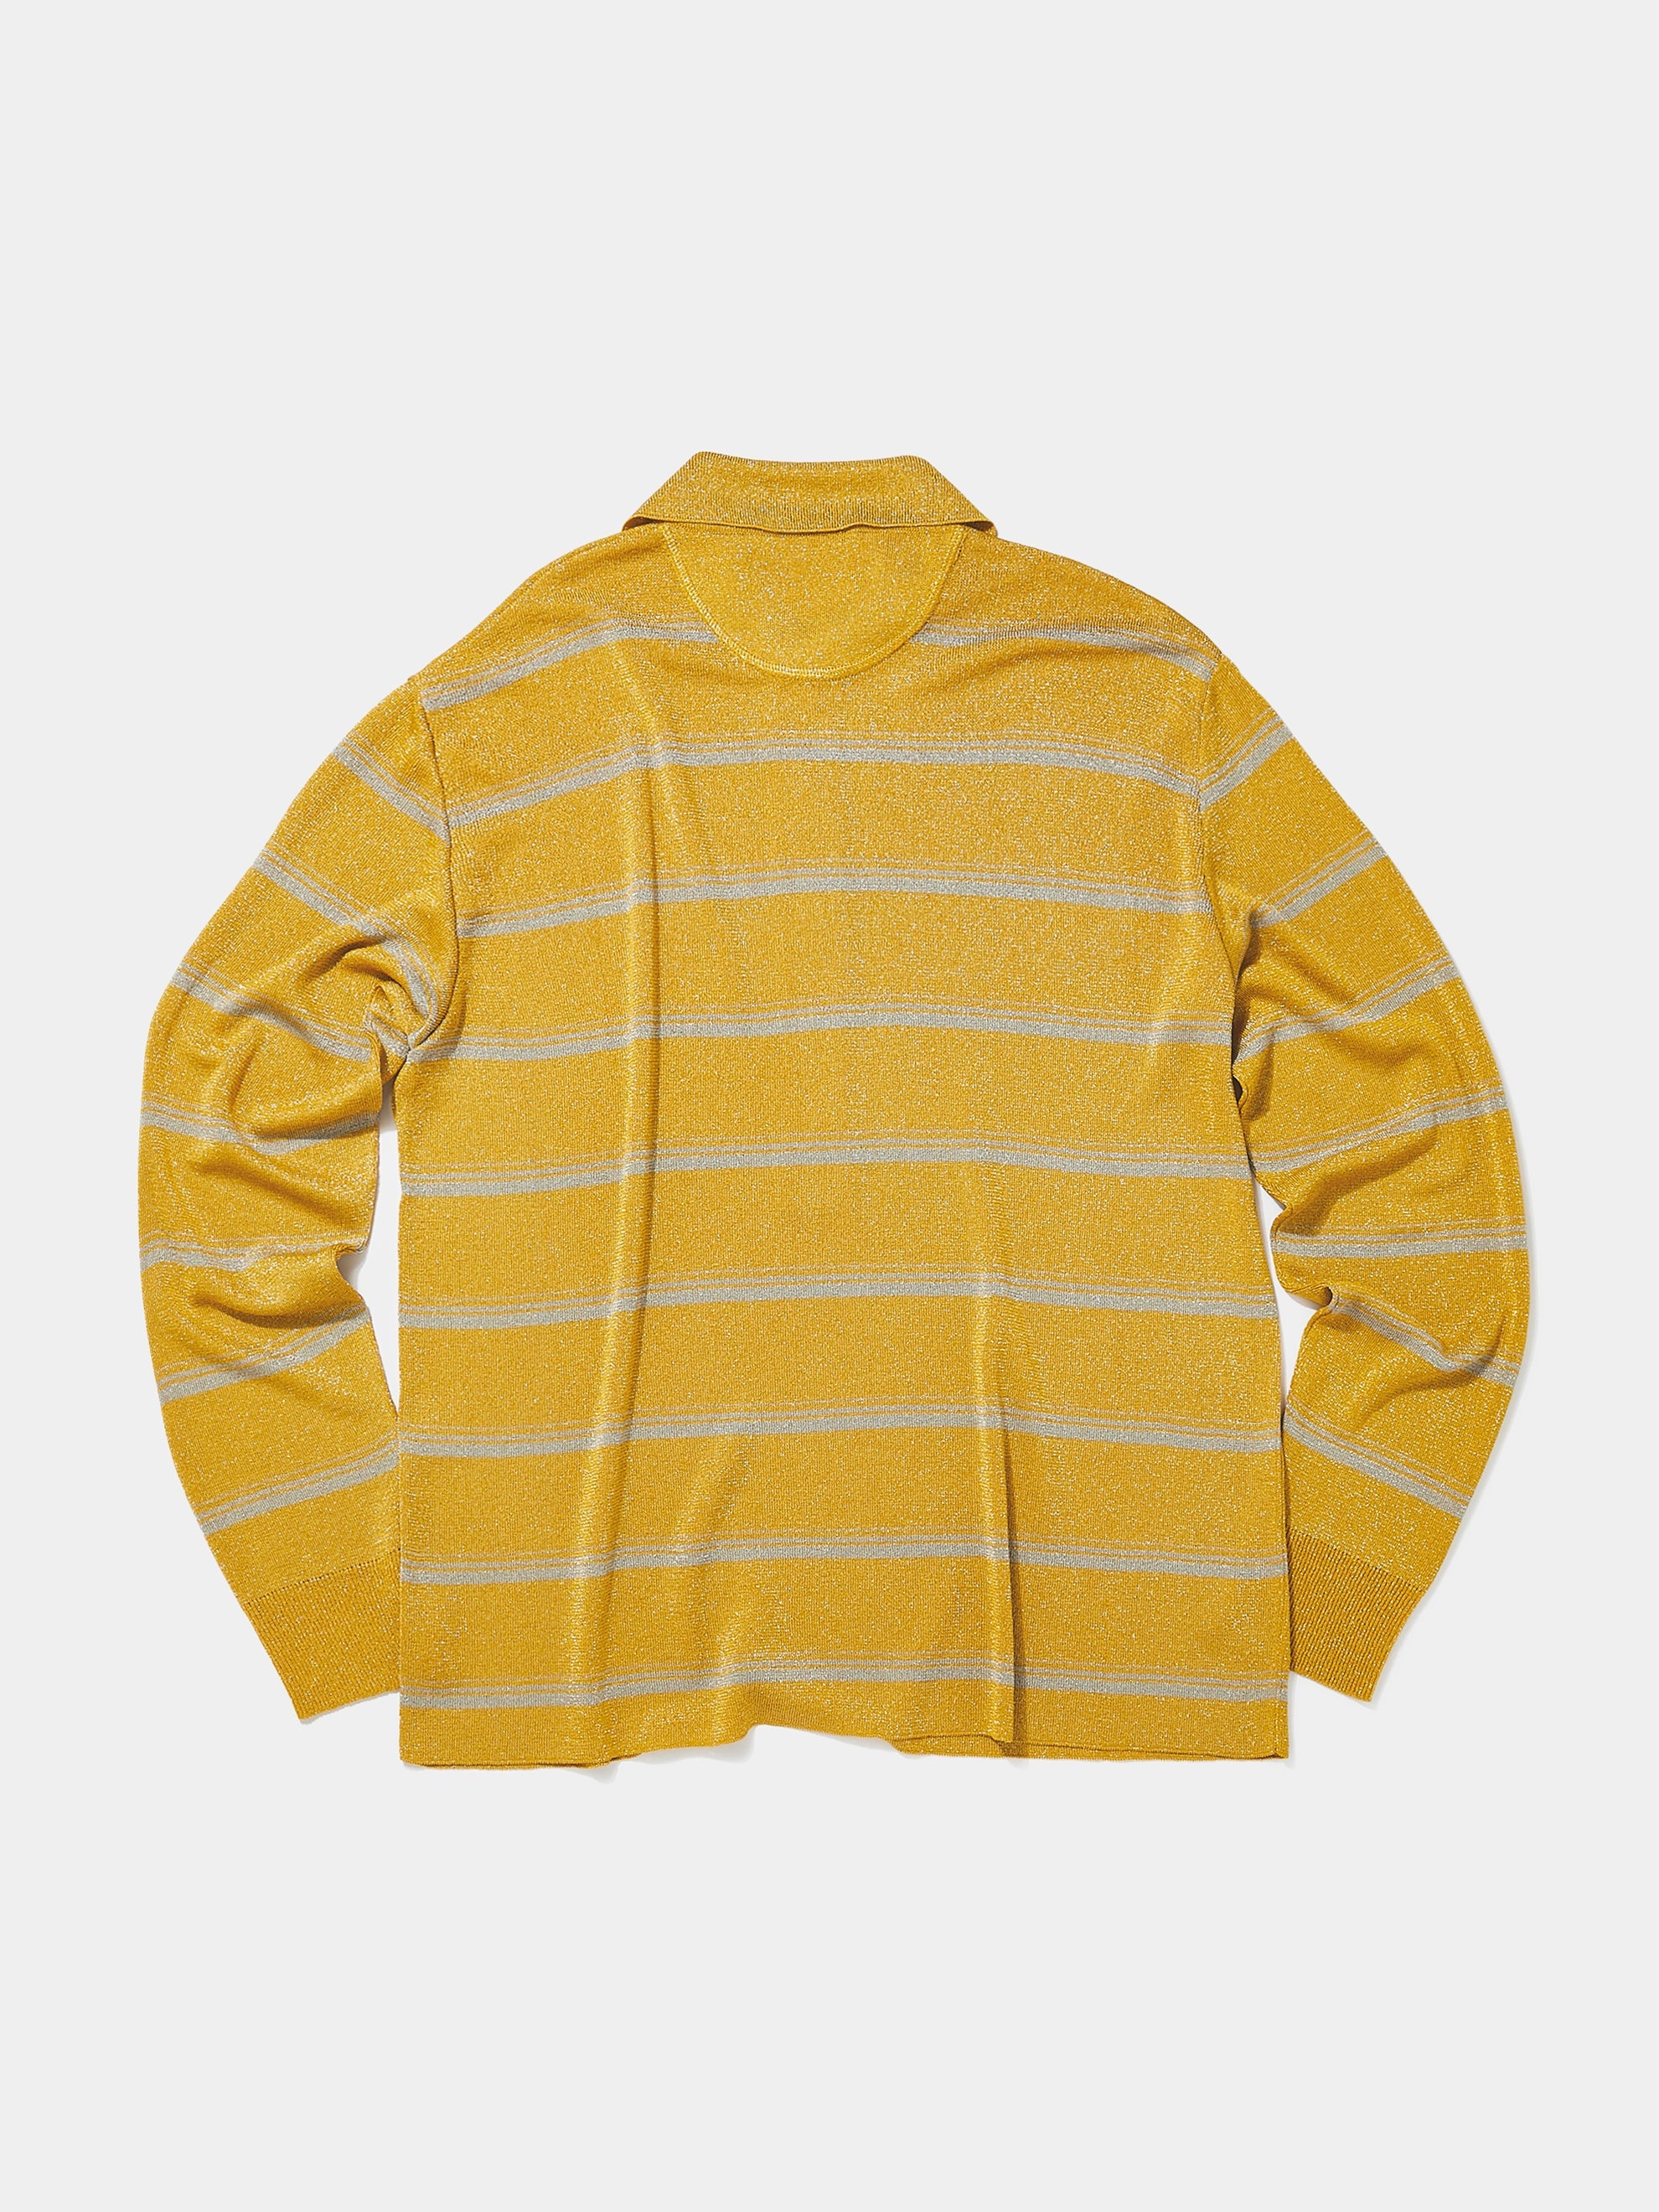 Buy Commission OVERSIZED DAD LUREX at LOS ANGELES Online UNION POLO